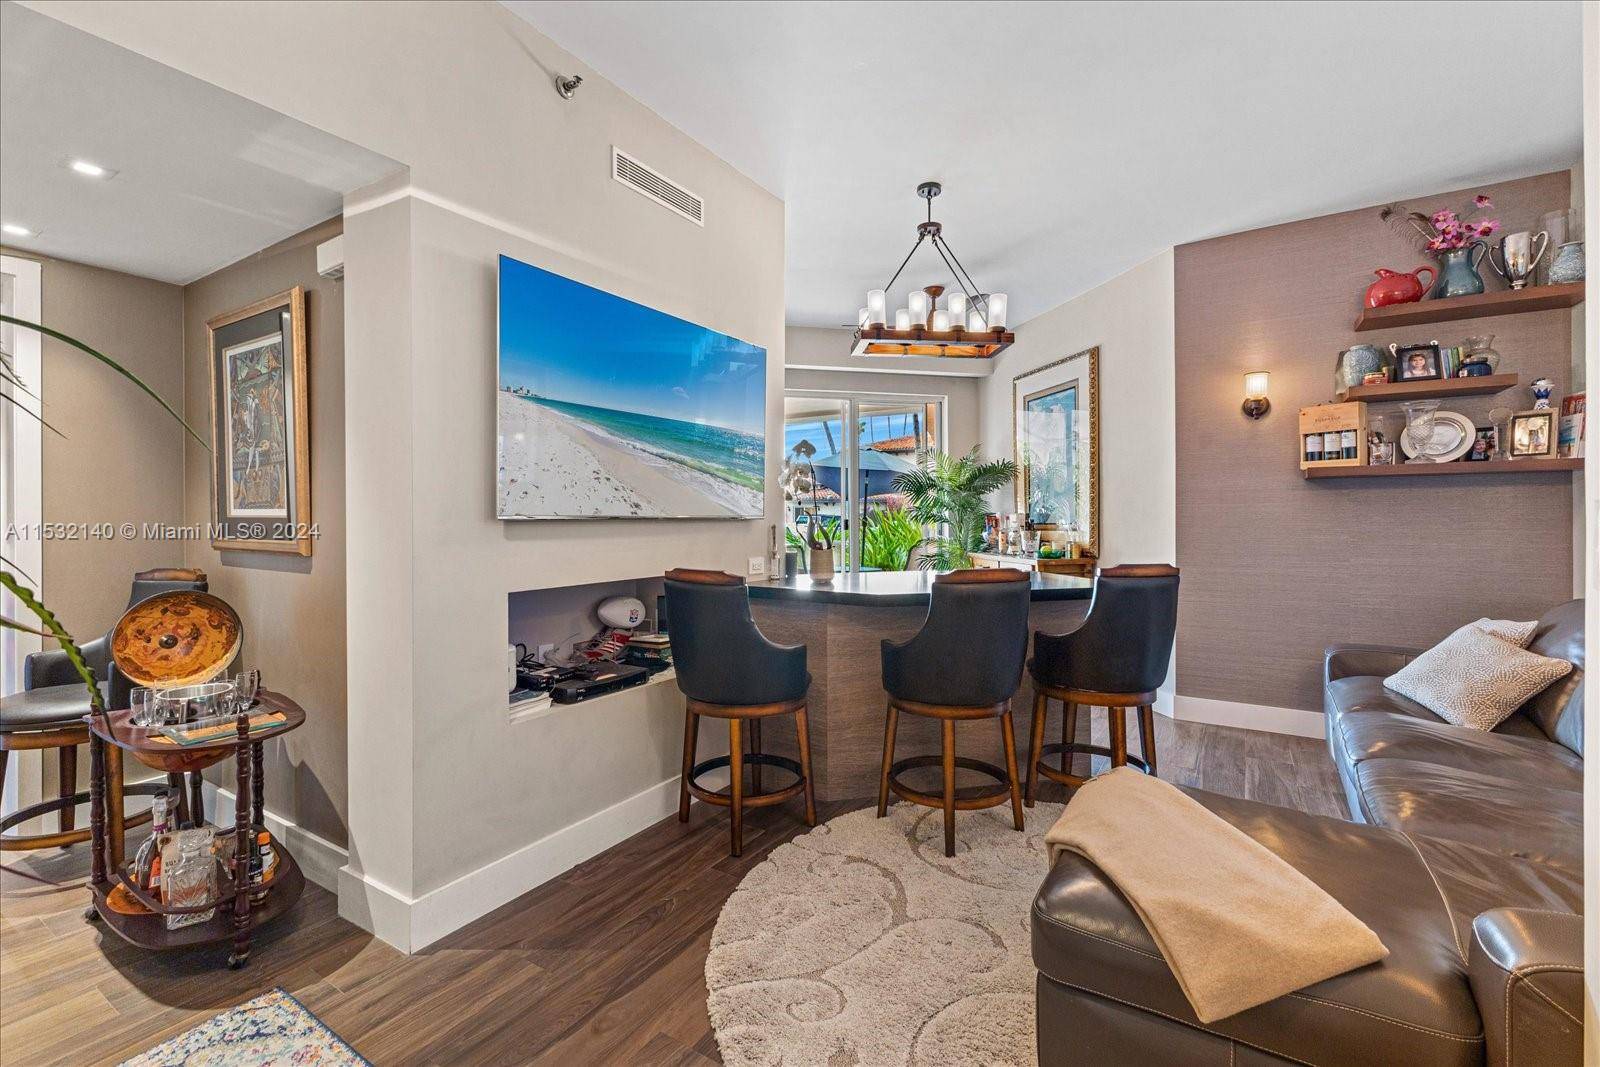 Experience Fisher Island living at it's finest in this beautifully renovated 1 bedroom, 1 bath Seaside Villa condo on the ground floor.